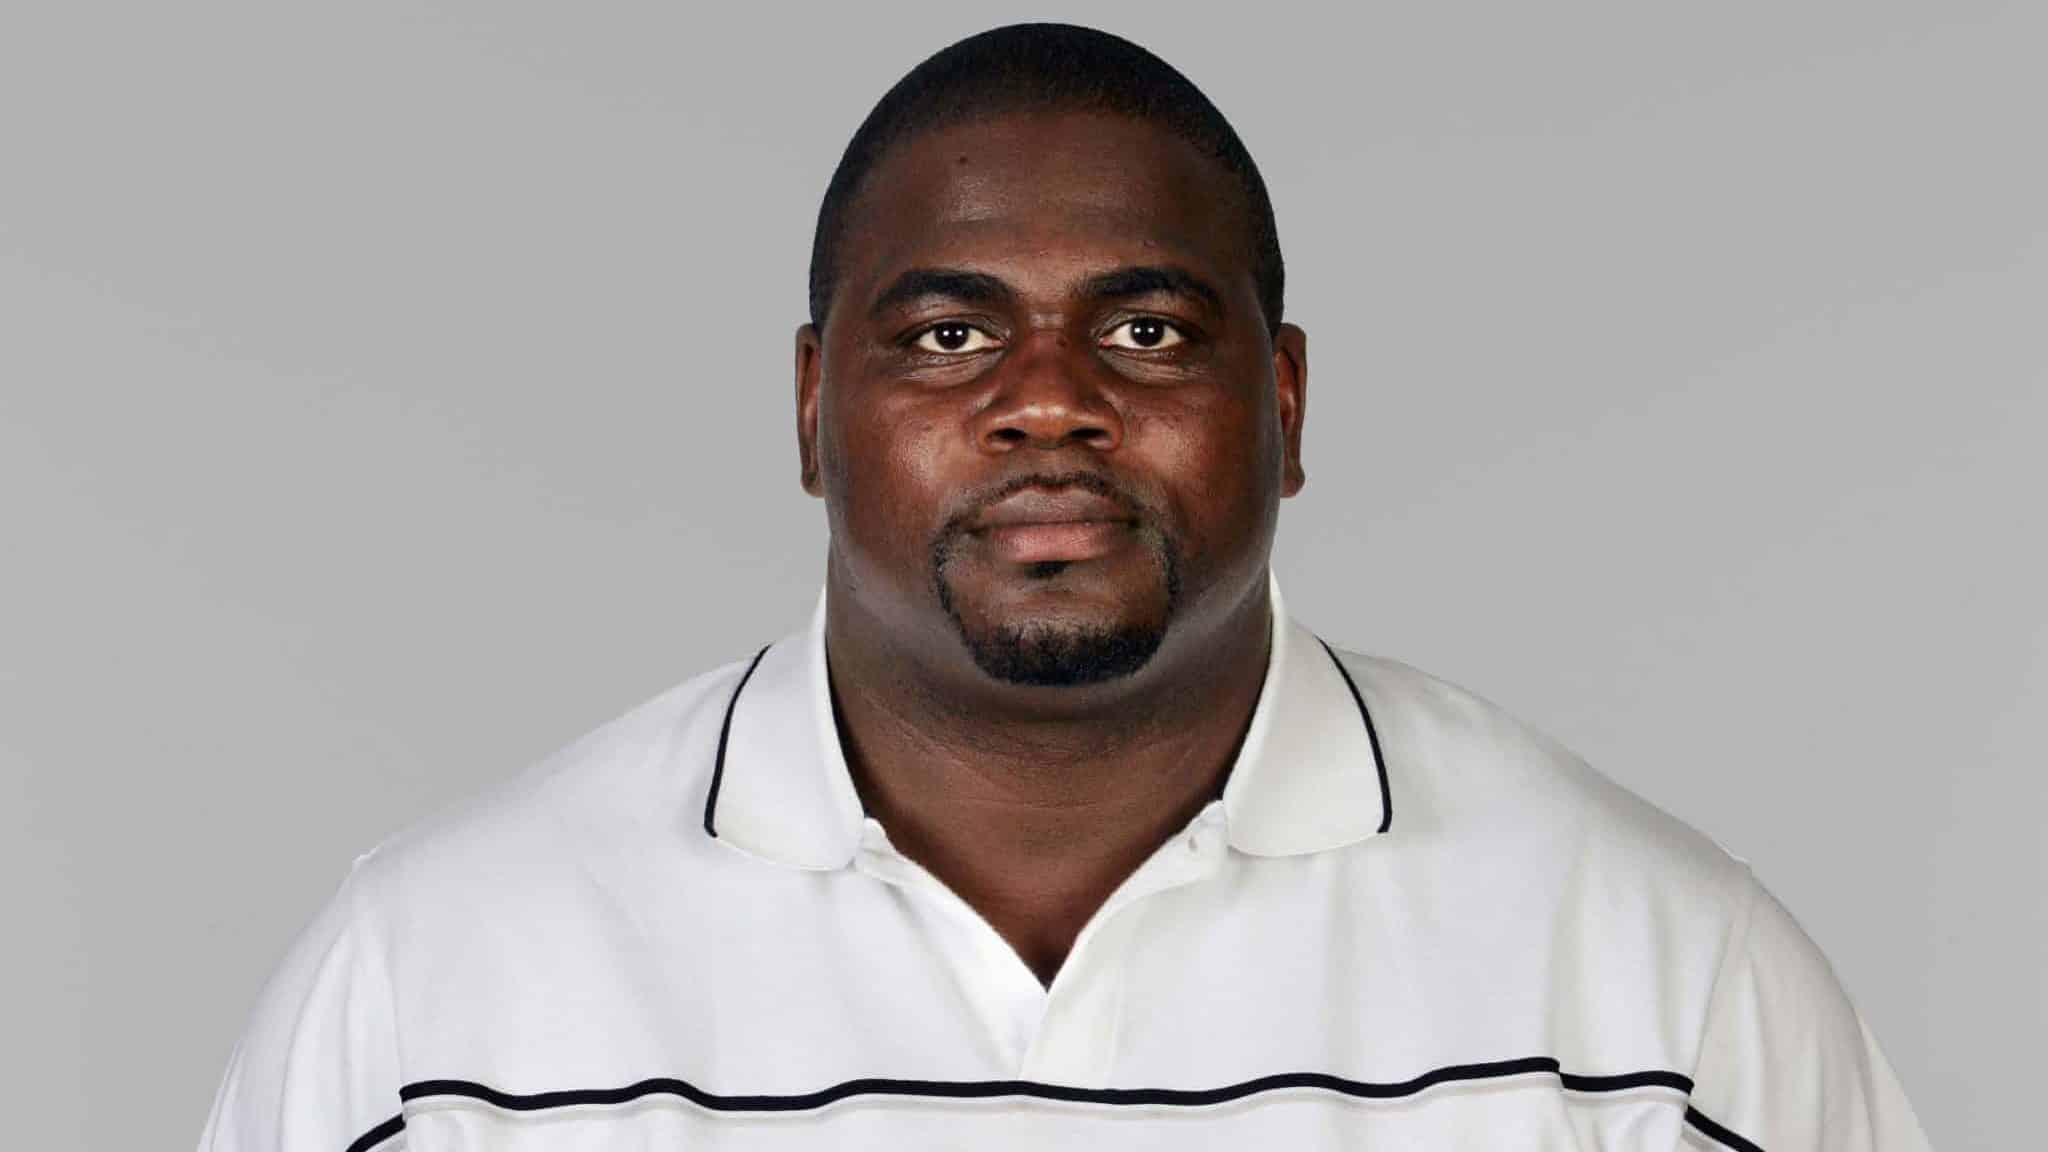 FOXBOROUGH, MA - CIRCA 2011: In this handout image provided by the NFL, Pepper Johnson of the New England Patriots poses for his NFL headshot circa 2011 in Foxborough, Massachusetts.